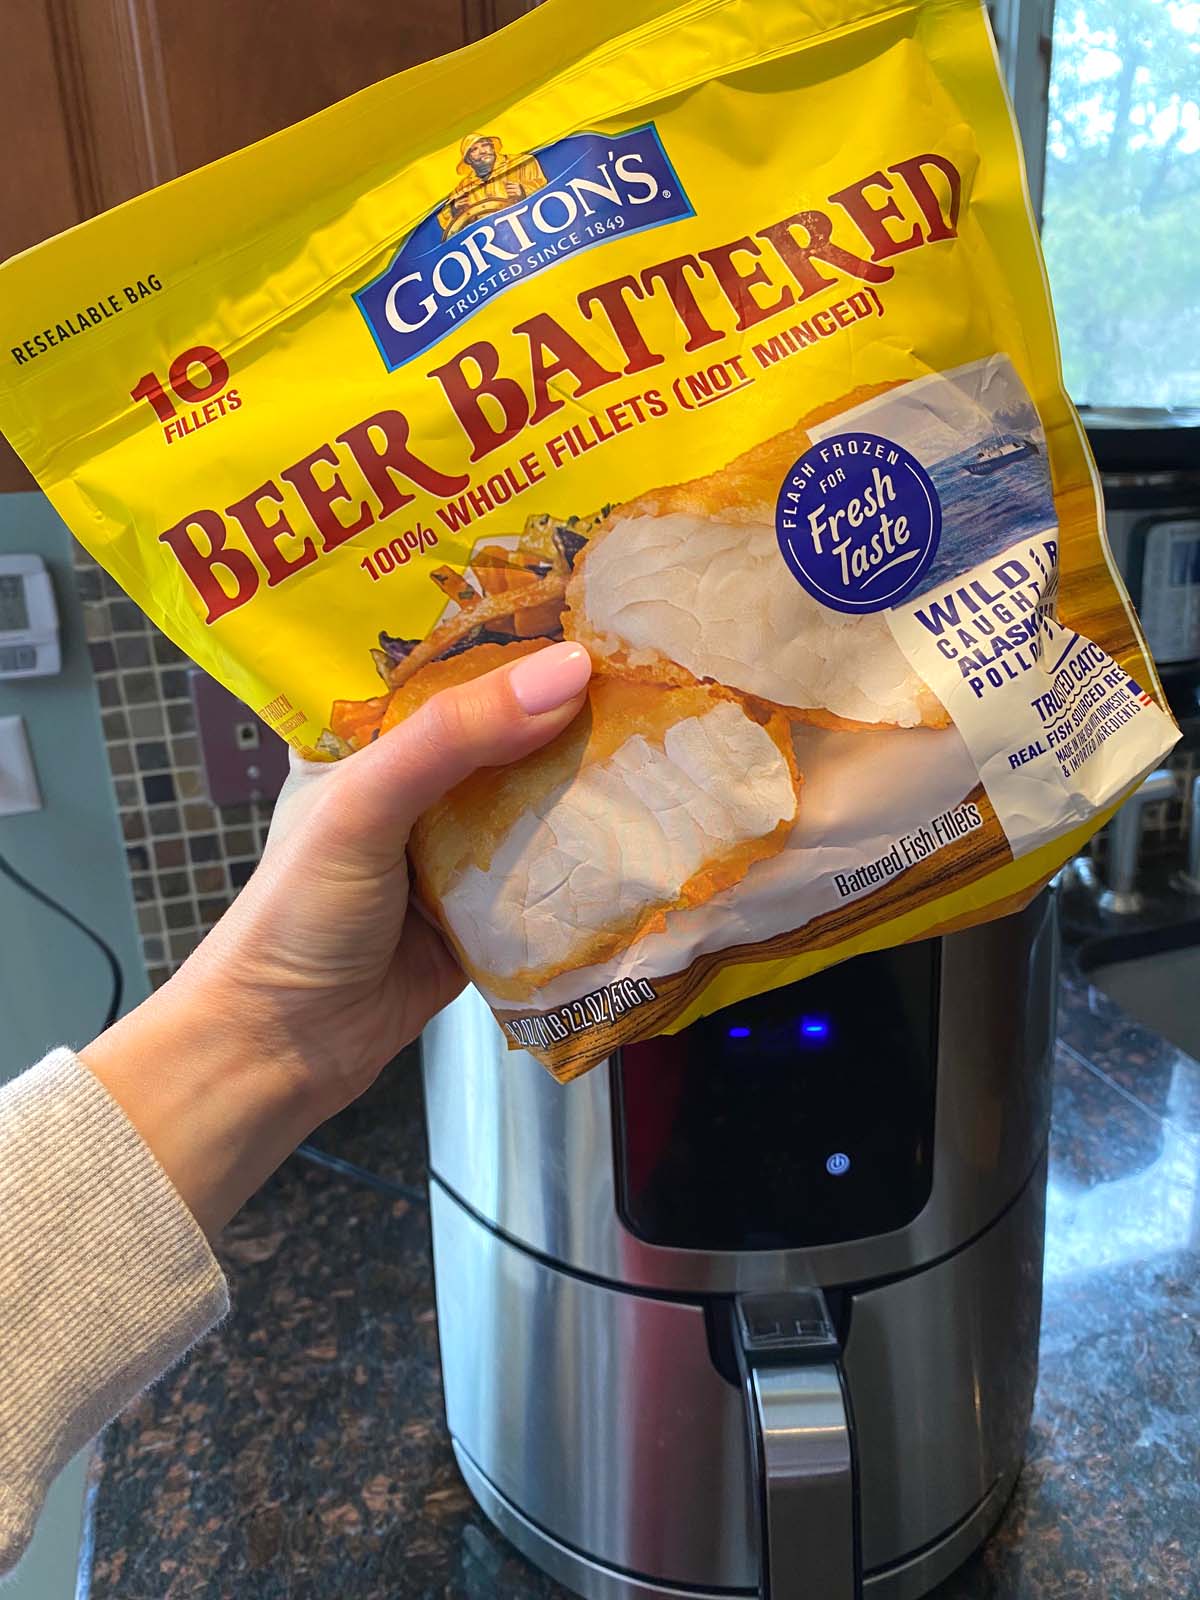 Bag of Gorton's Beer Battered Fish Filets being held in front of an air fryer.